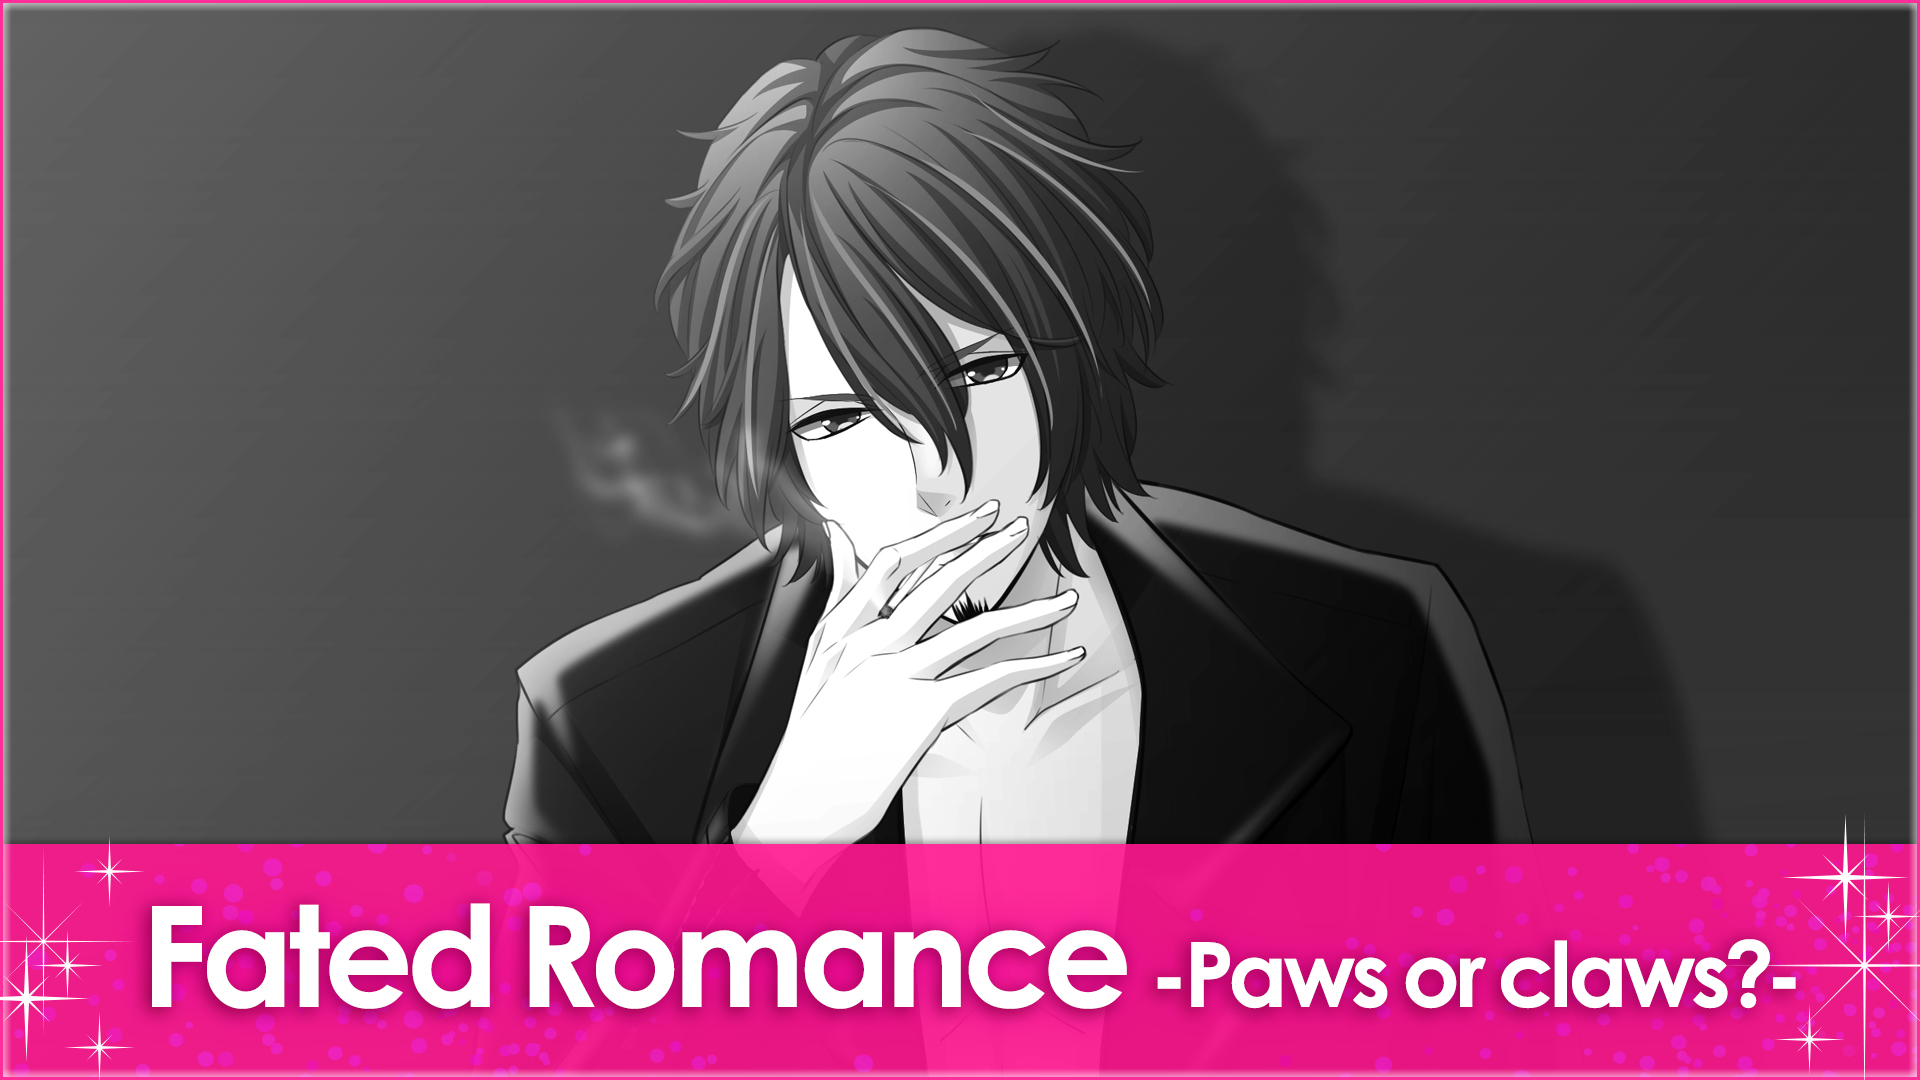 Fated Romance -Paws or claws?-